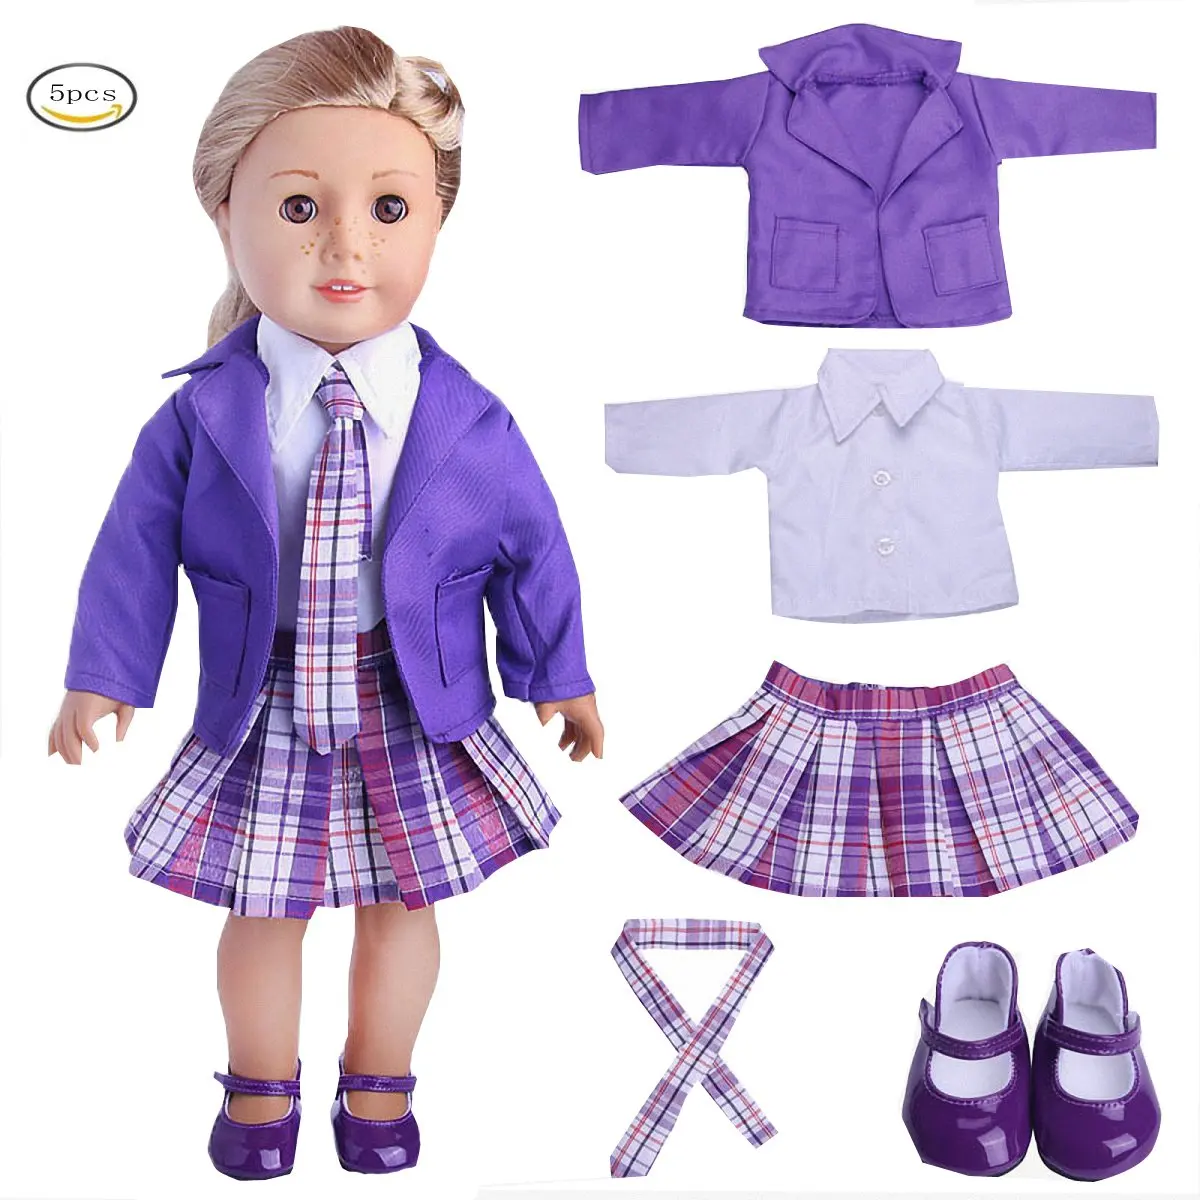 real baby dolls for school